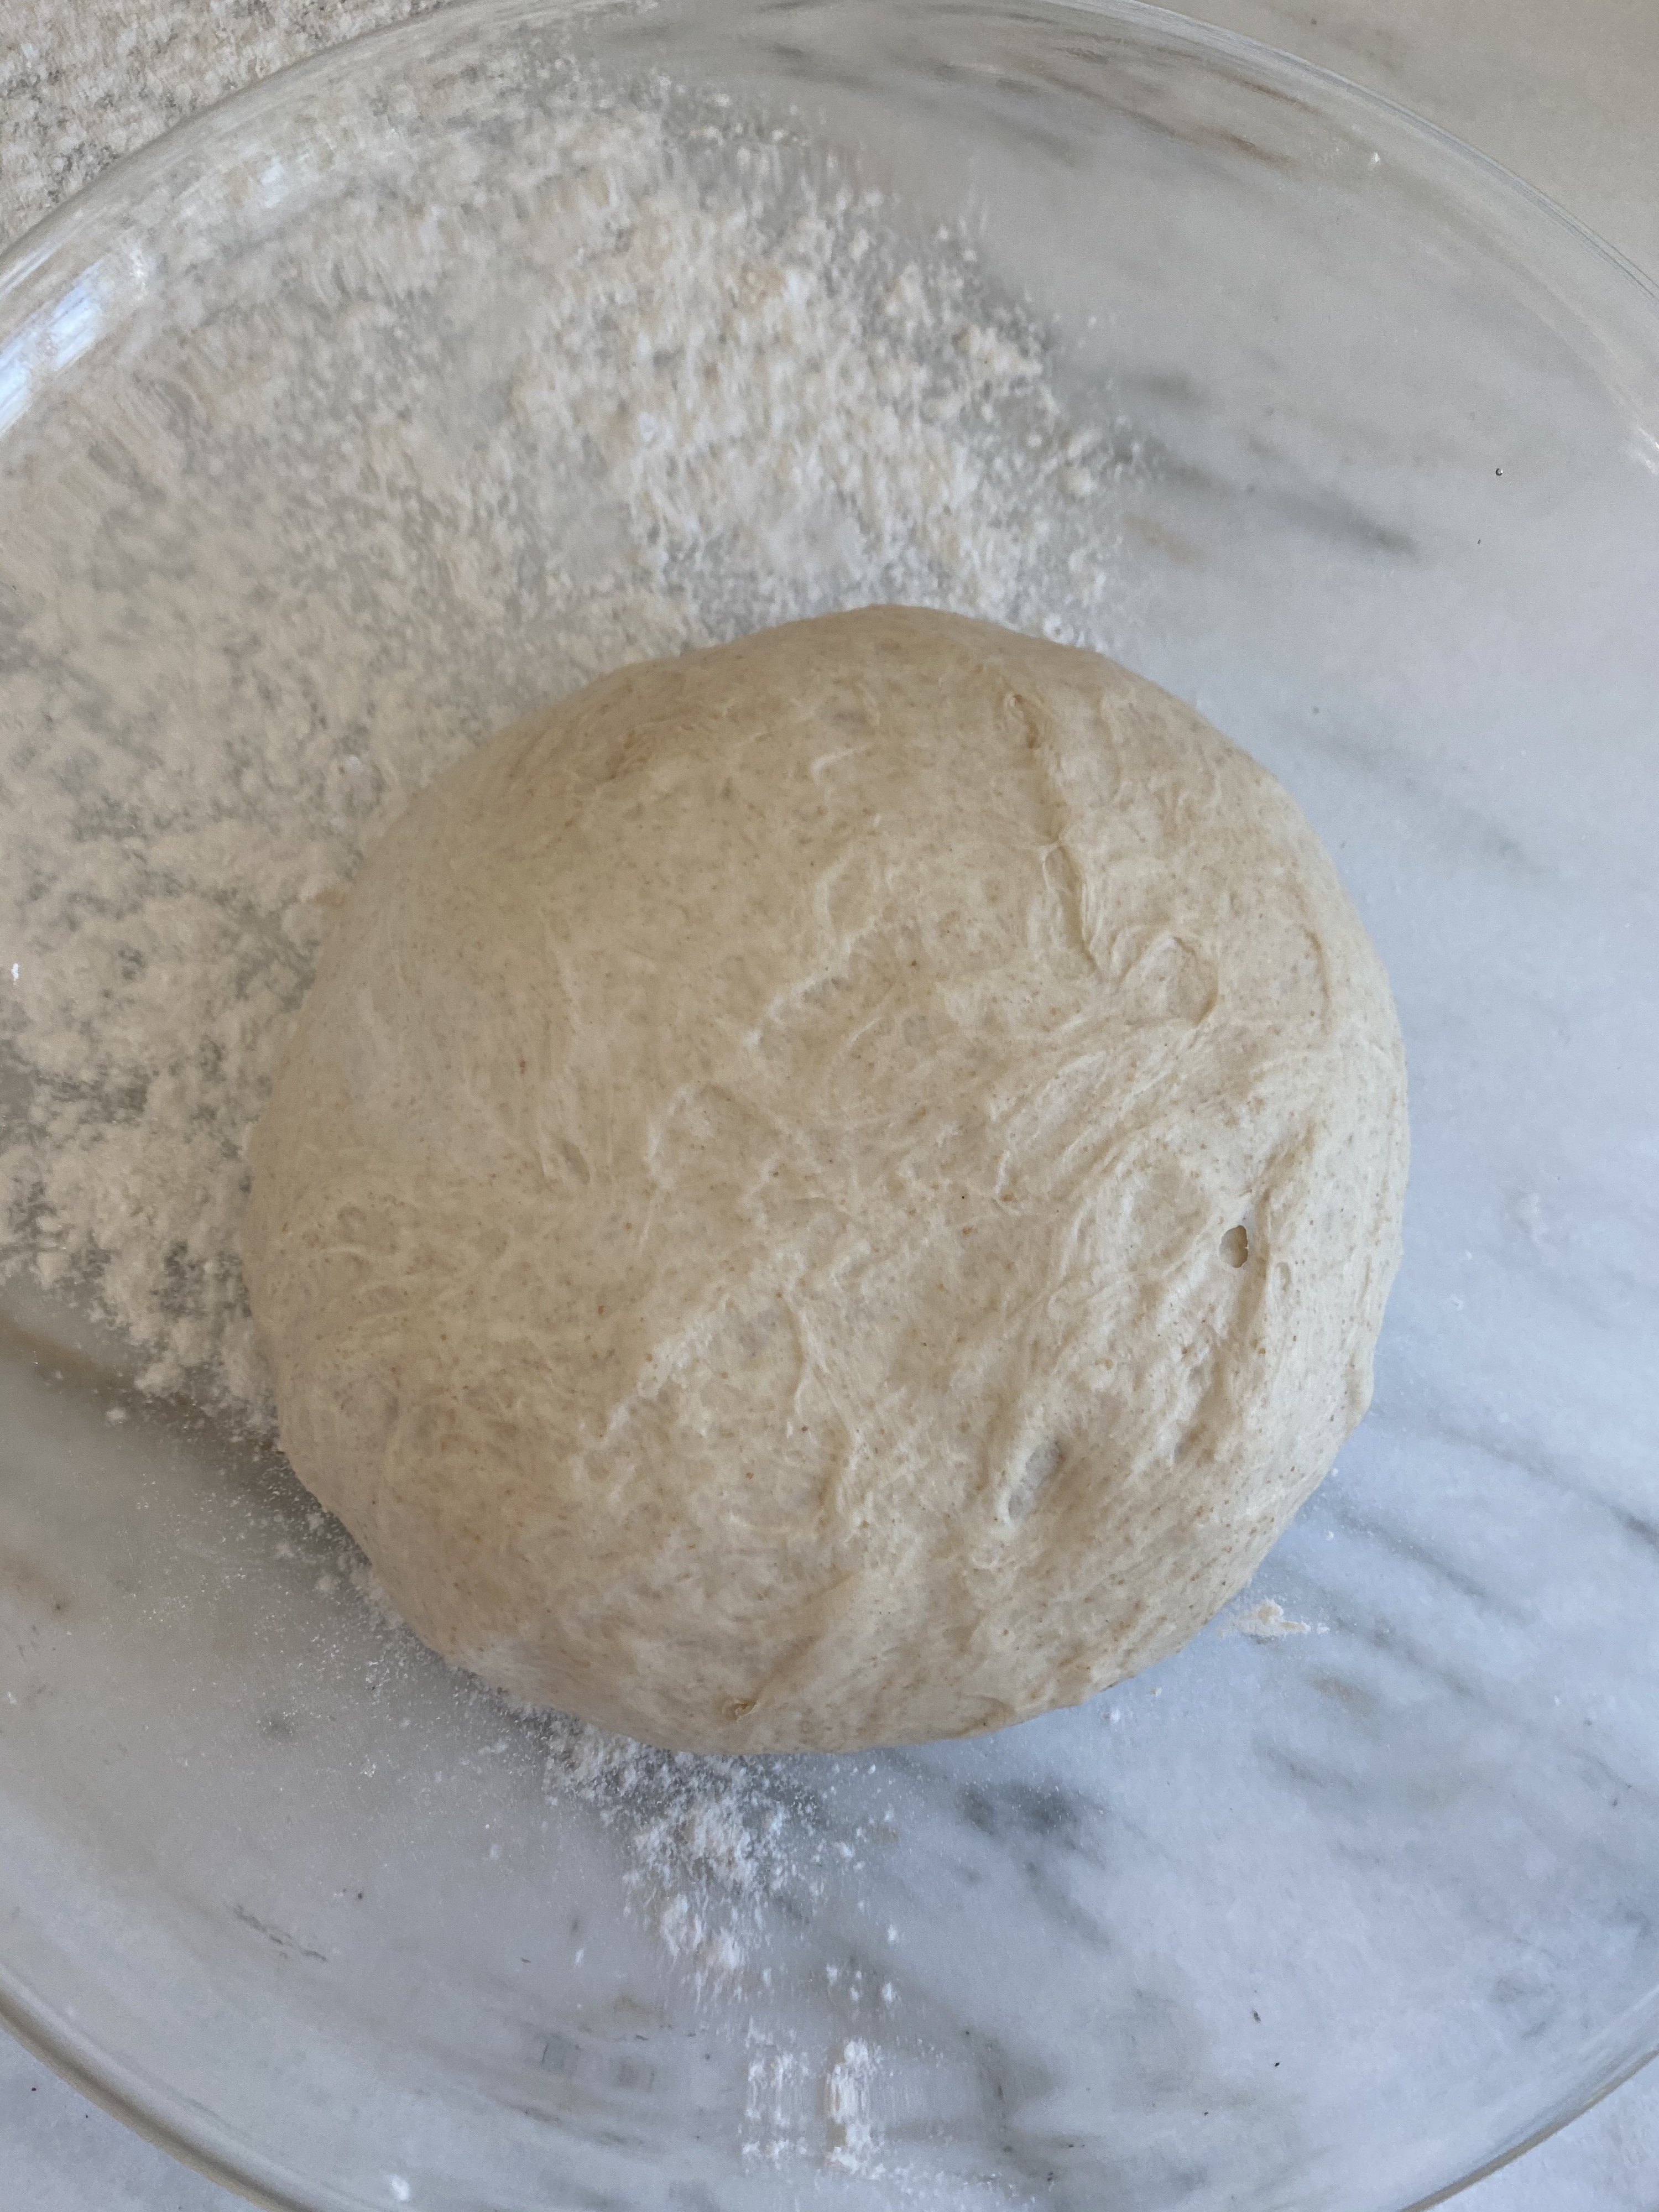 A ball of dough rising in a glass mixing bowl.